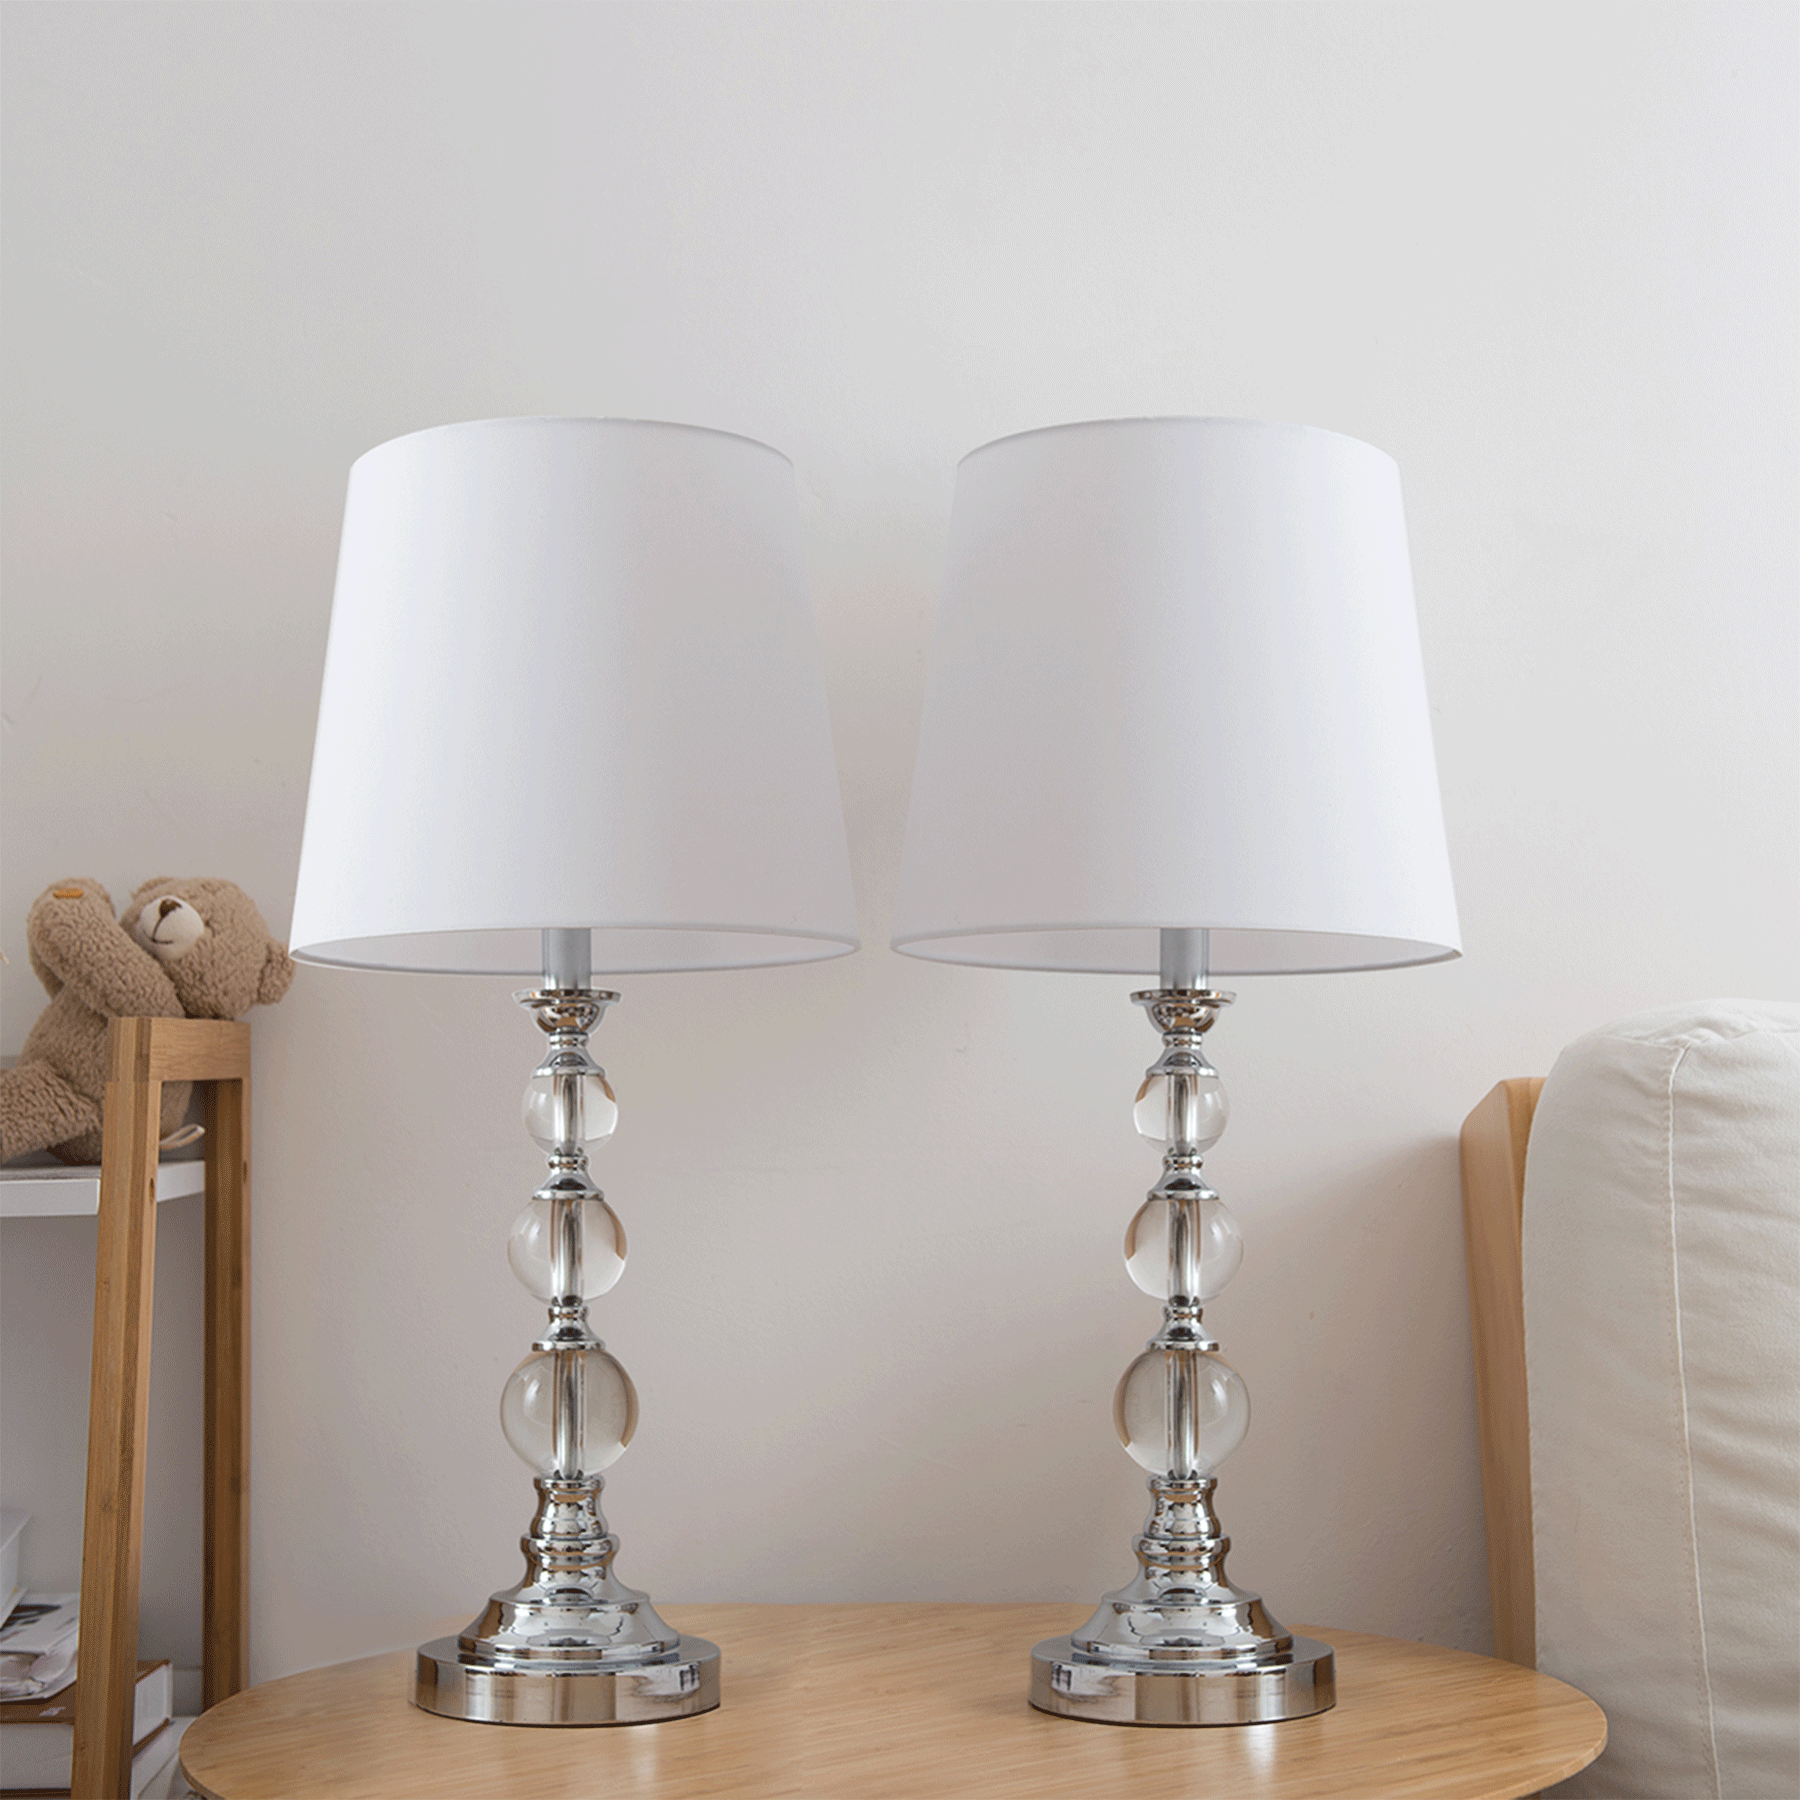 2 Deluxe Table Lamp Crystal Ball White, Clear Crystal Table Lamp Base